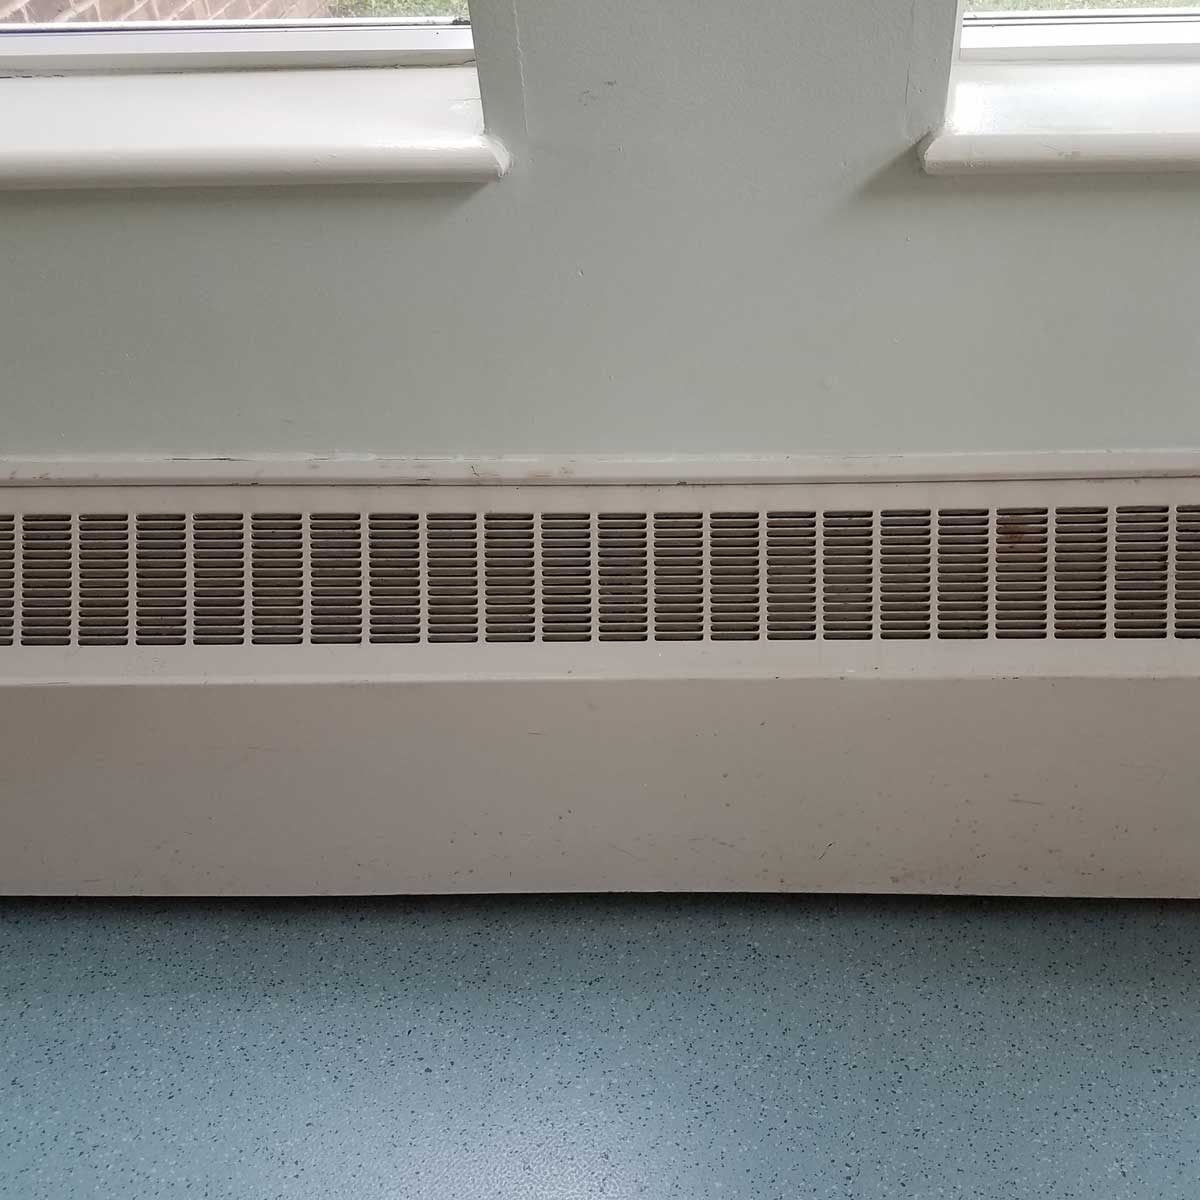 Hydronic Baseboard Heater Buyers Guide: How to Choose, Costs and Installation, Safety Considerations